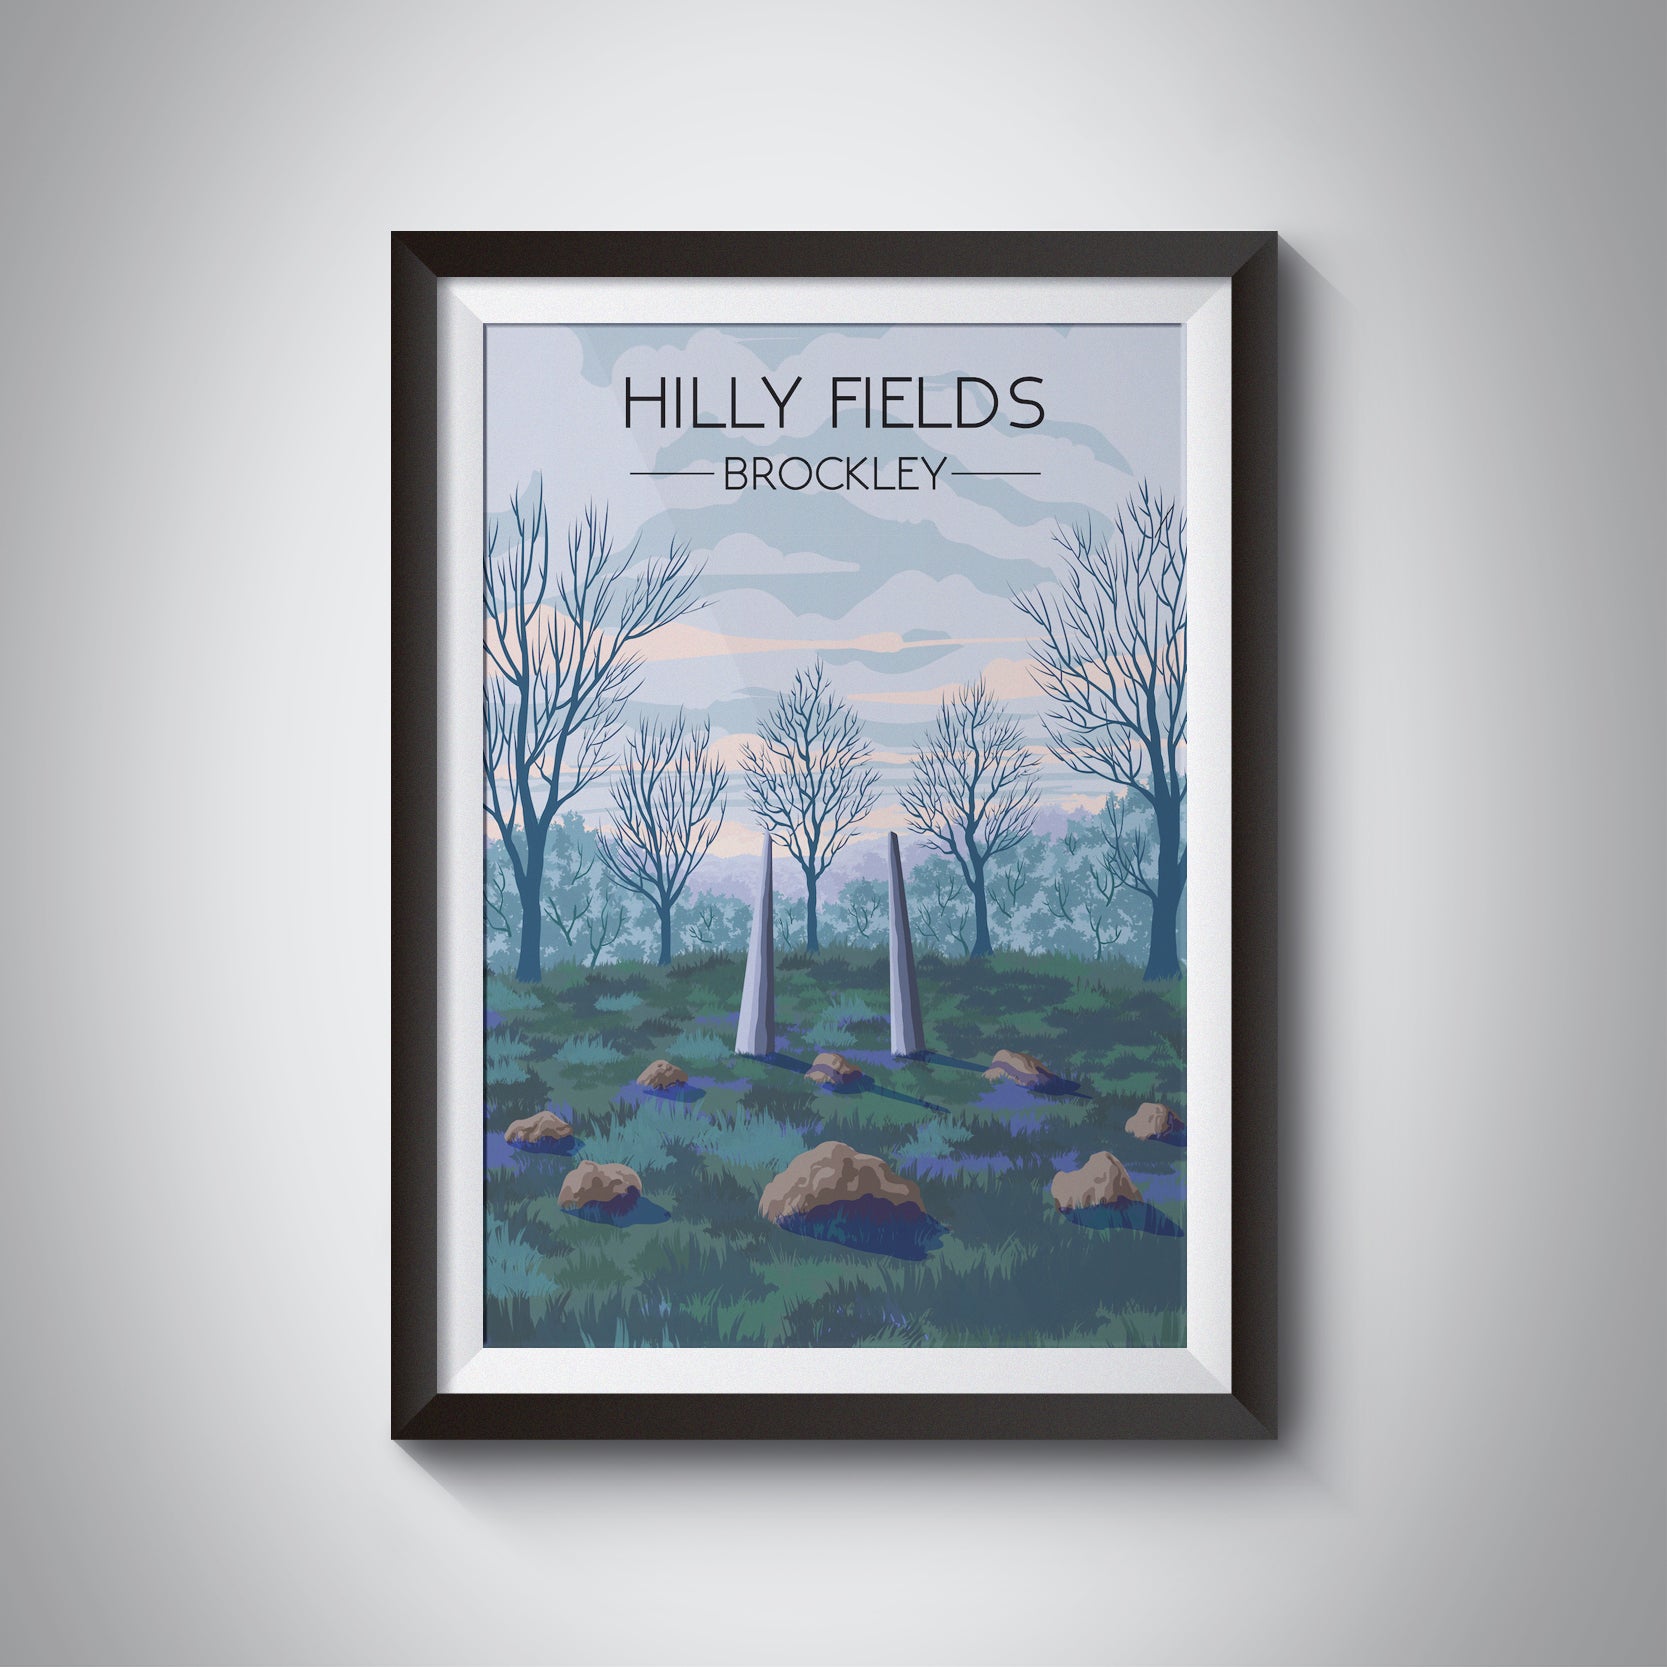 Hilly Fields London Park Travel Poster